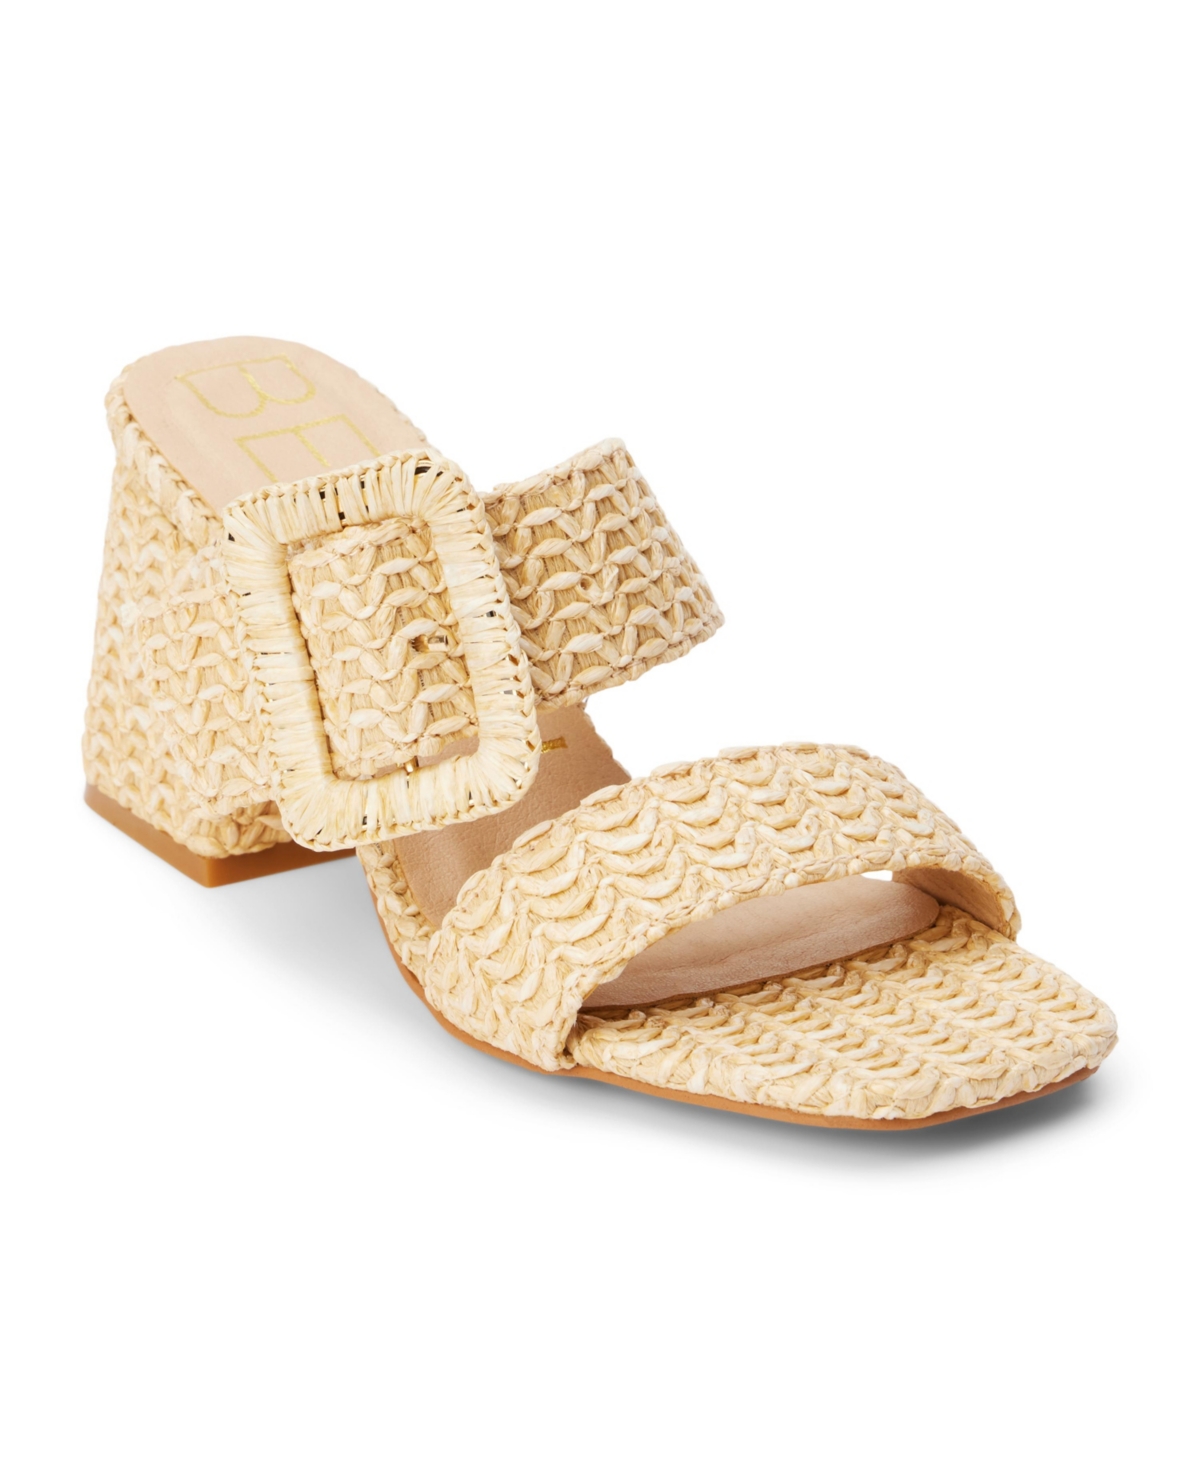 Lucy Women's Sandals - Natural